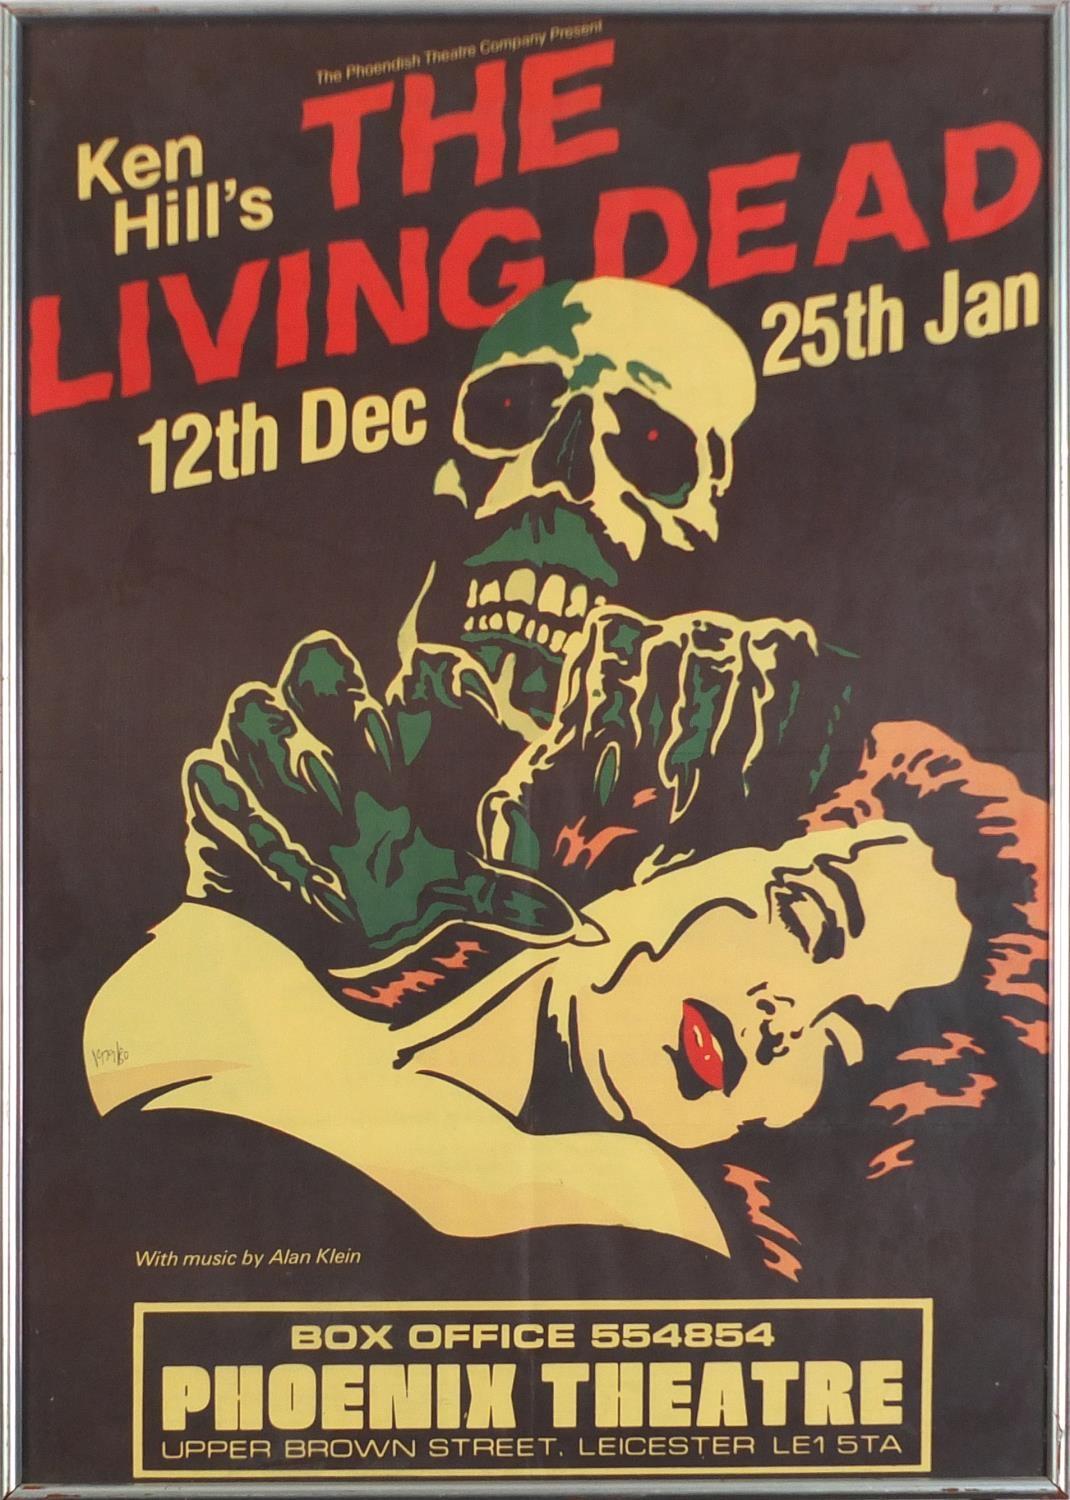 Vintage The Living Dead Phoenix Theatre advertising poster, framed and glazed, 59cm x 41cm : For - Image 2 of 3